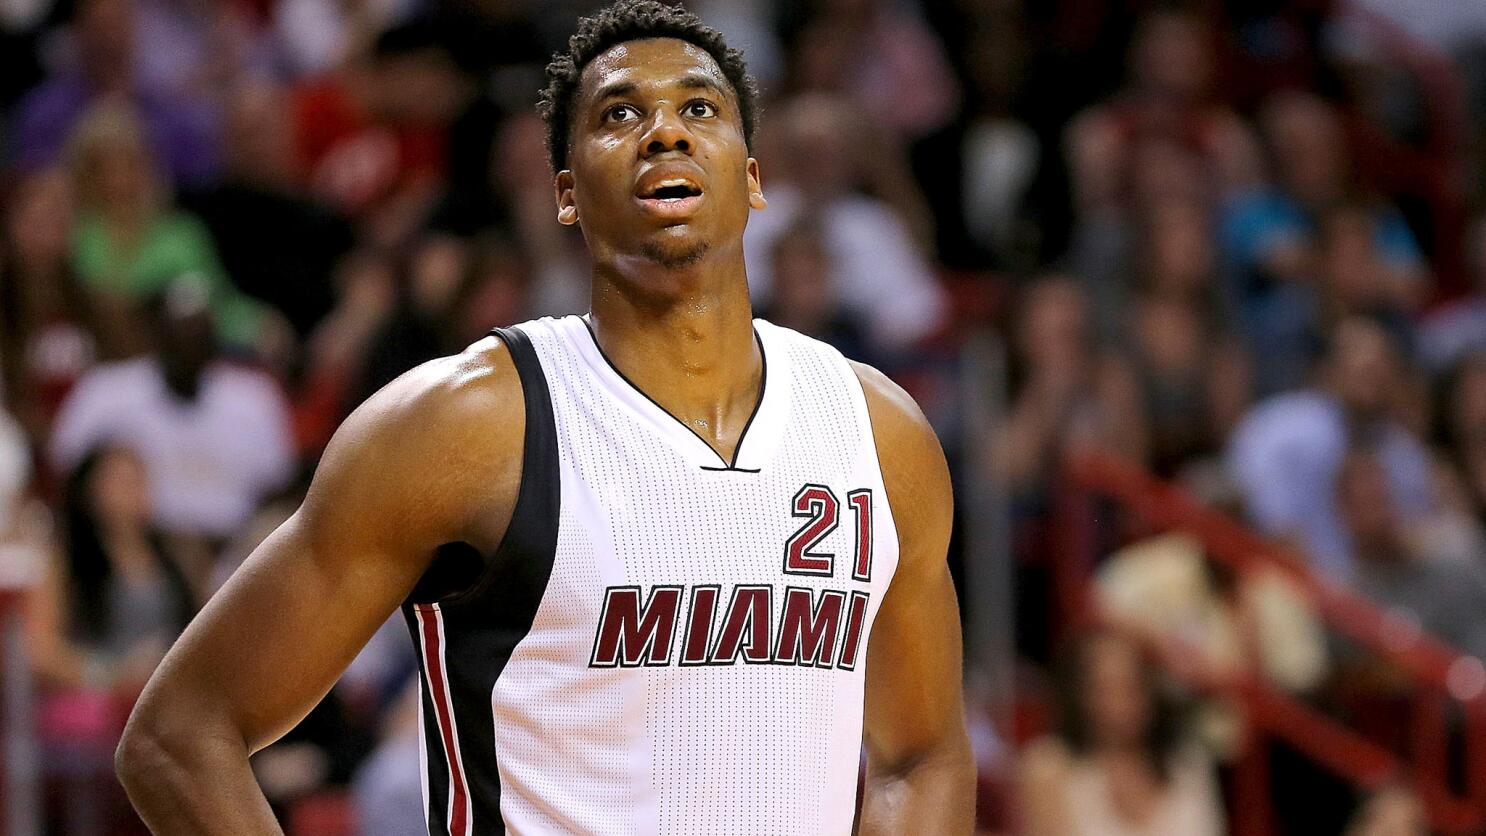 Hassan Whiteside Announces He's Staying in Miami - The New York Times